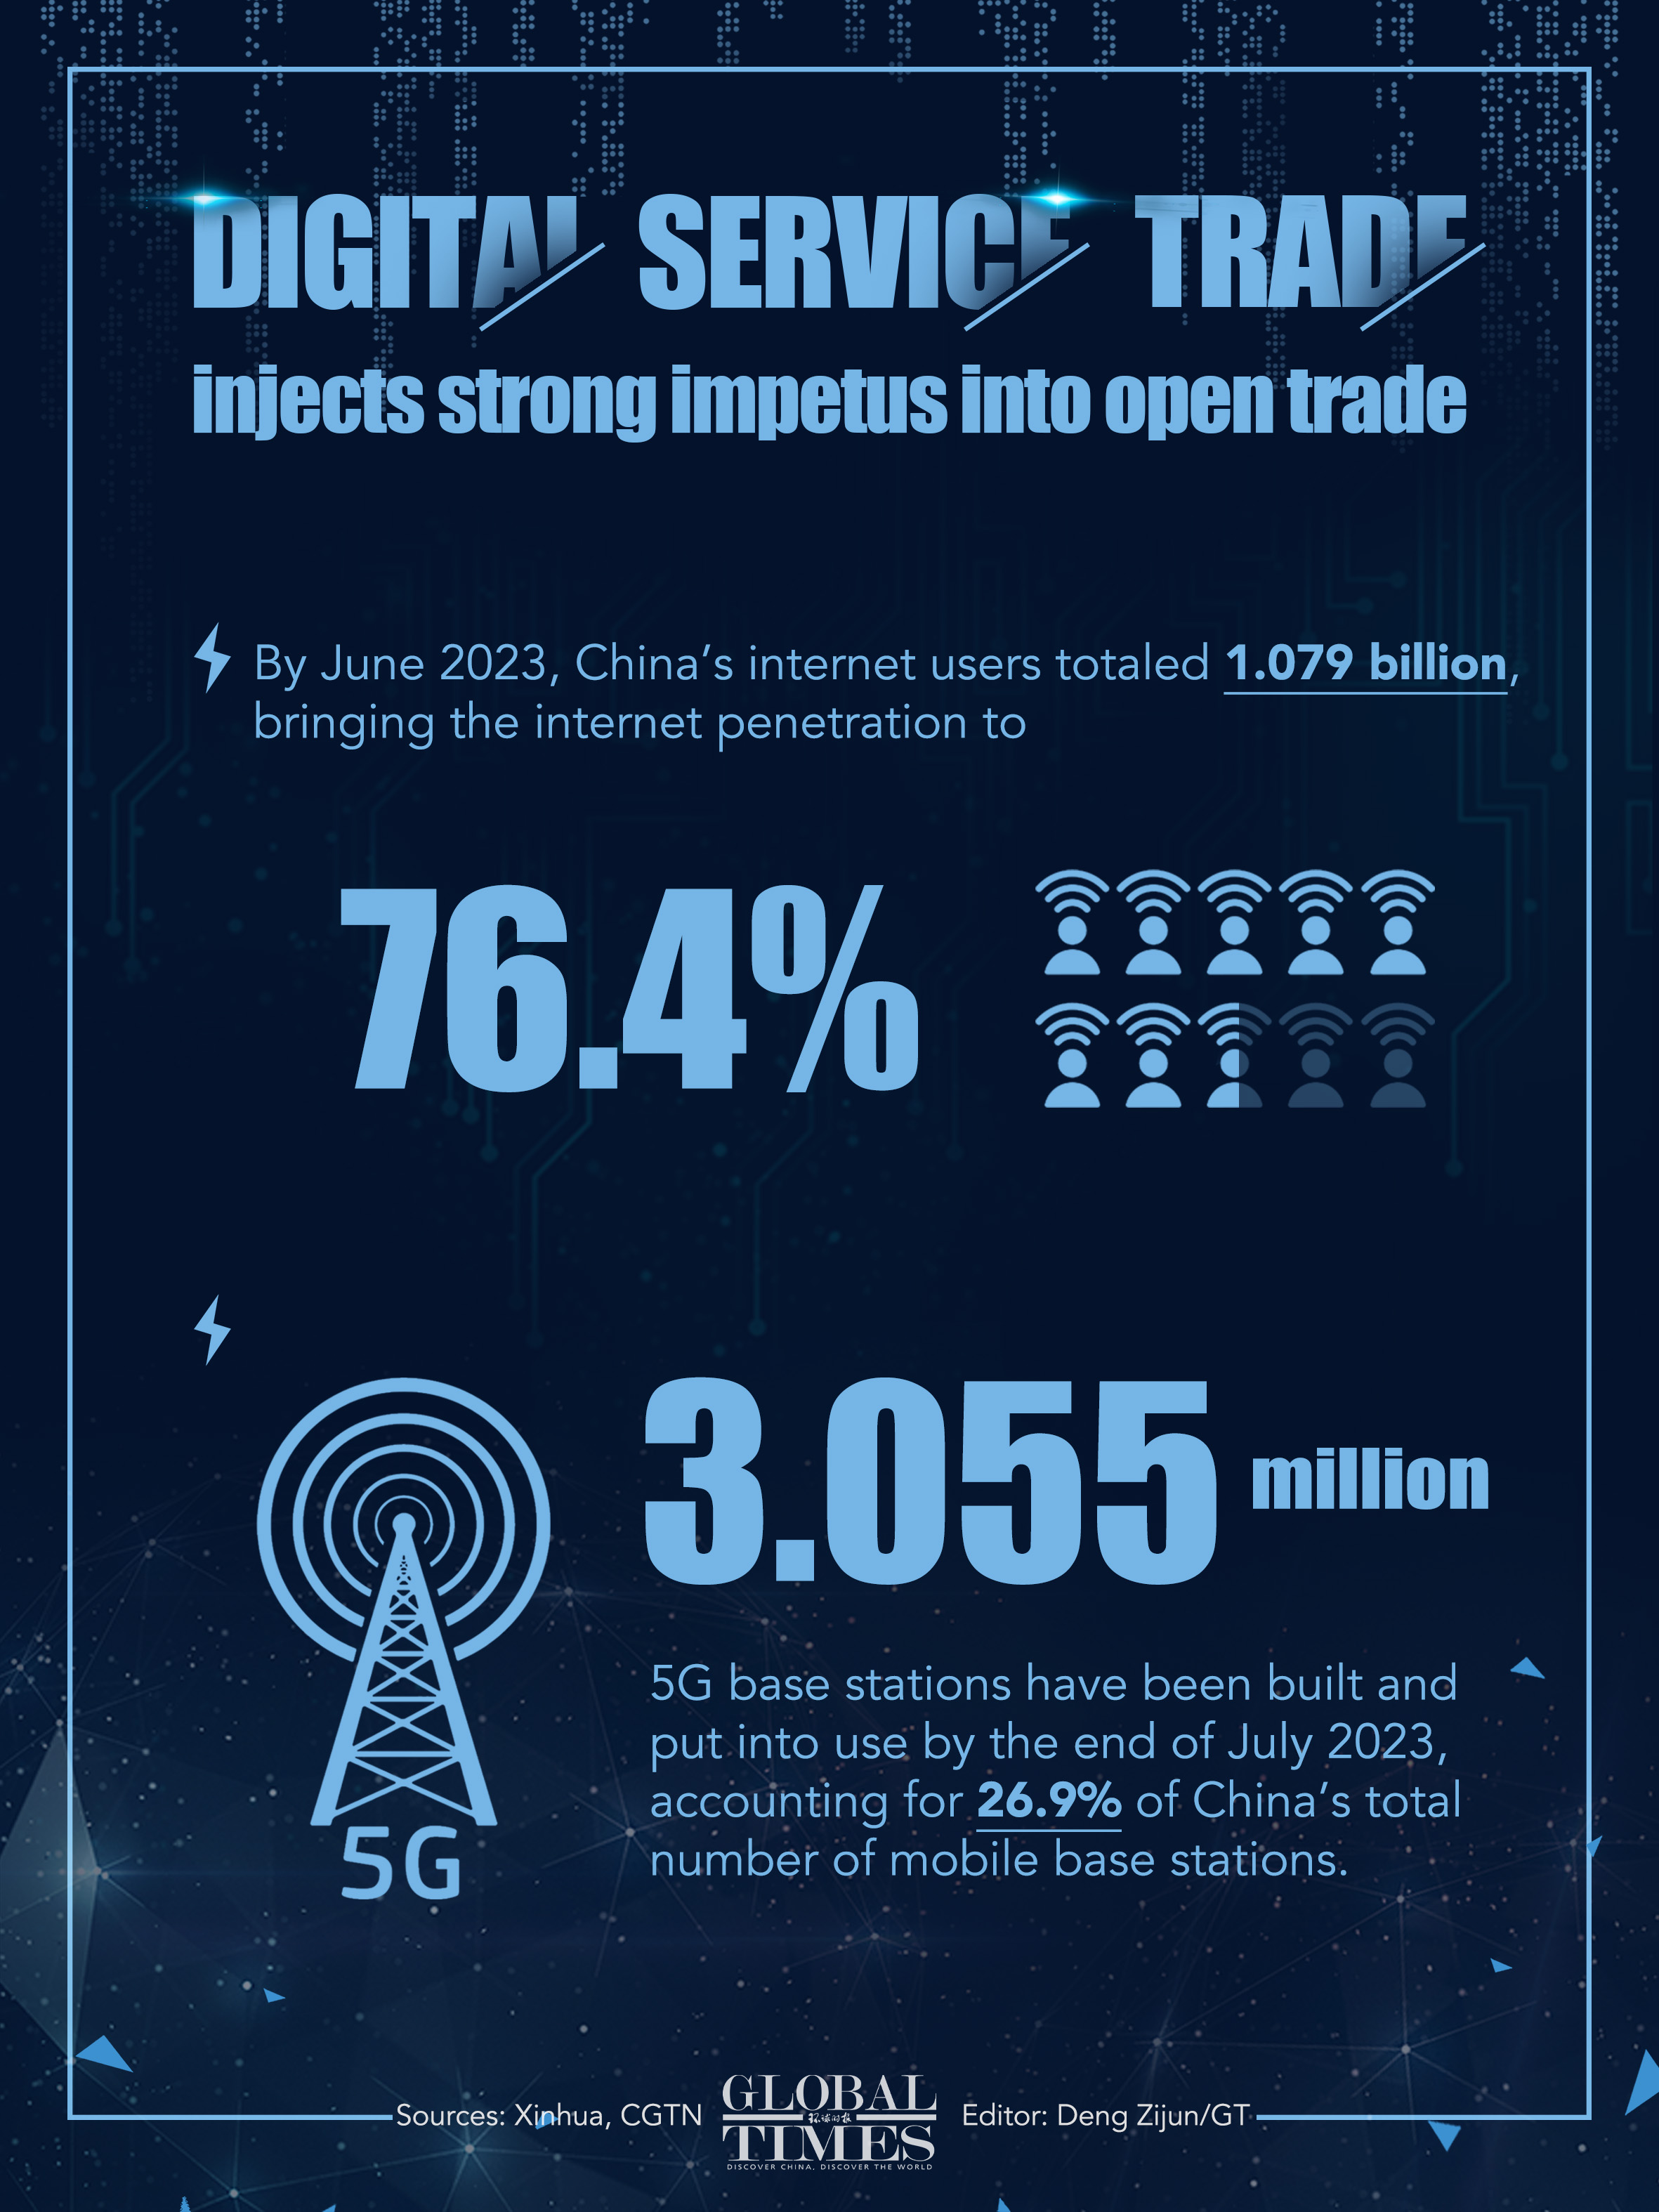 Digital service trade injects strong impetus into open trade Graphic: Deng Zijun/GT